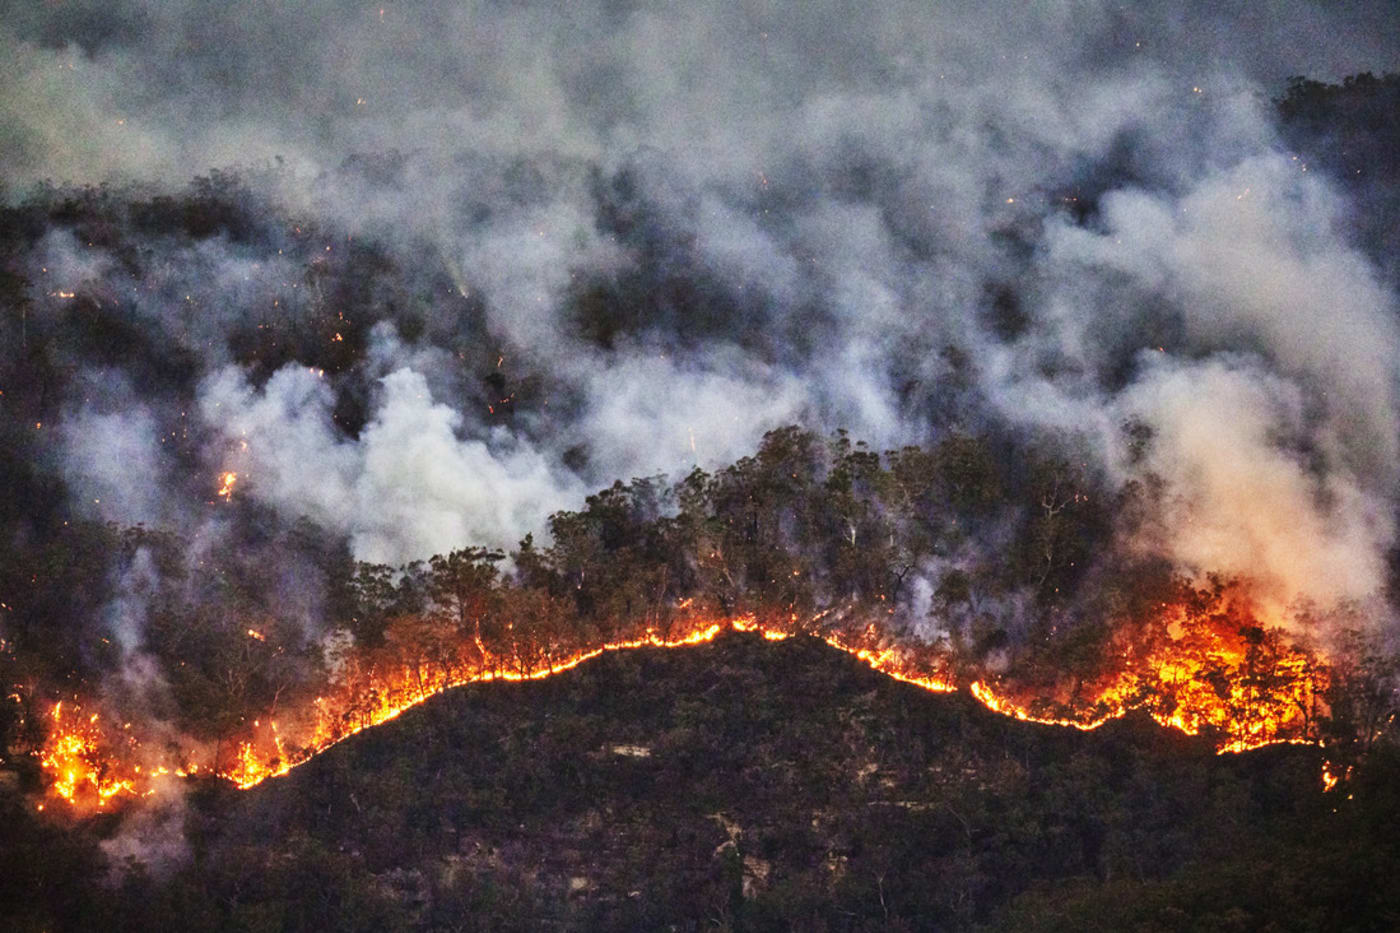 The fire front at night appears as a bright yellow and red jagged line in the dark blue eucalyptus forest in the Jamison Valley